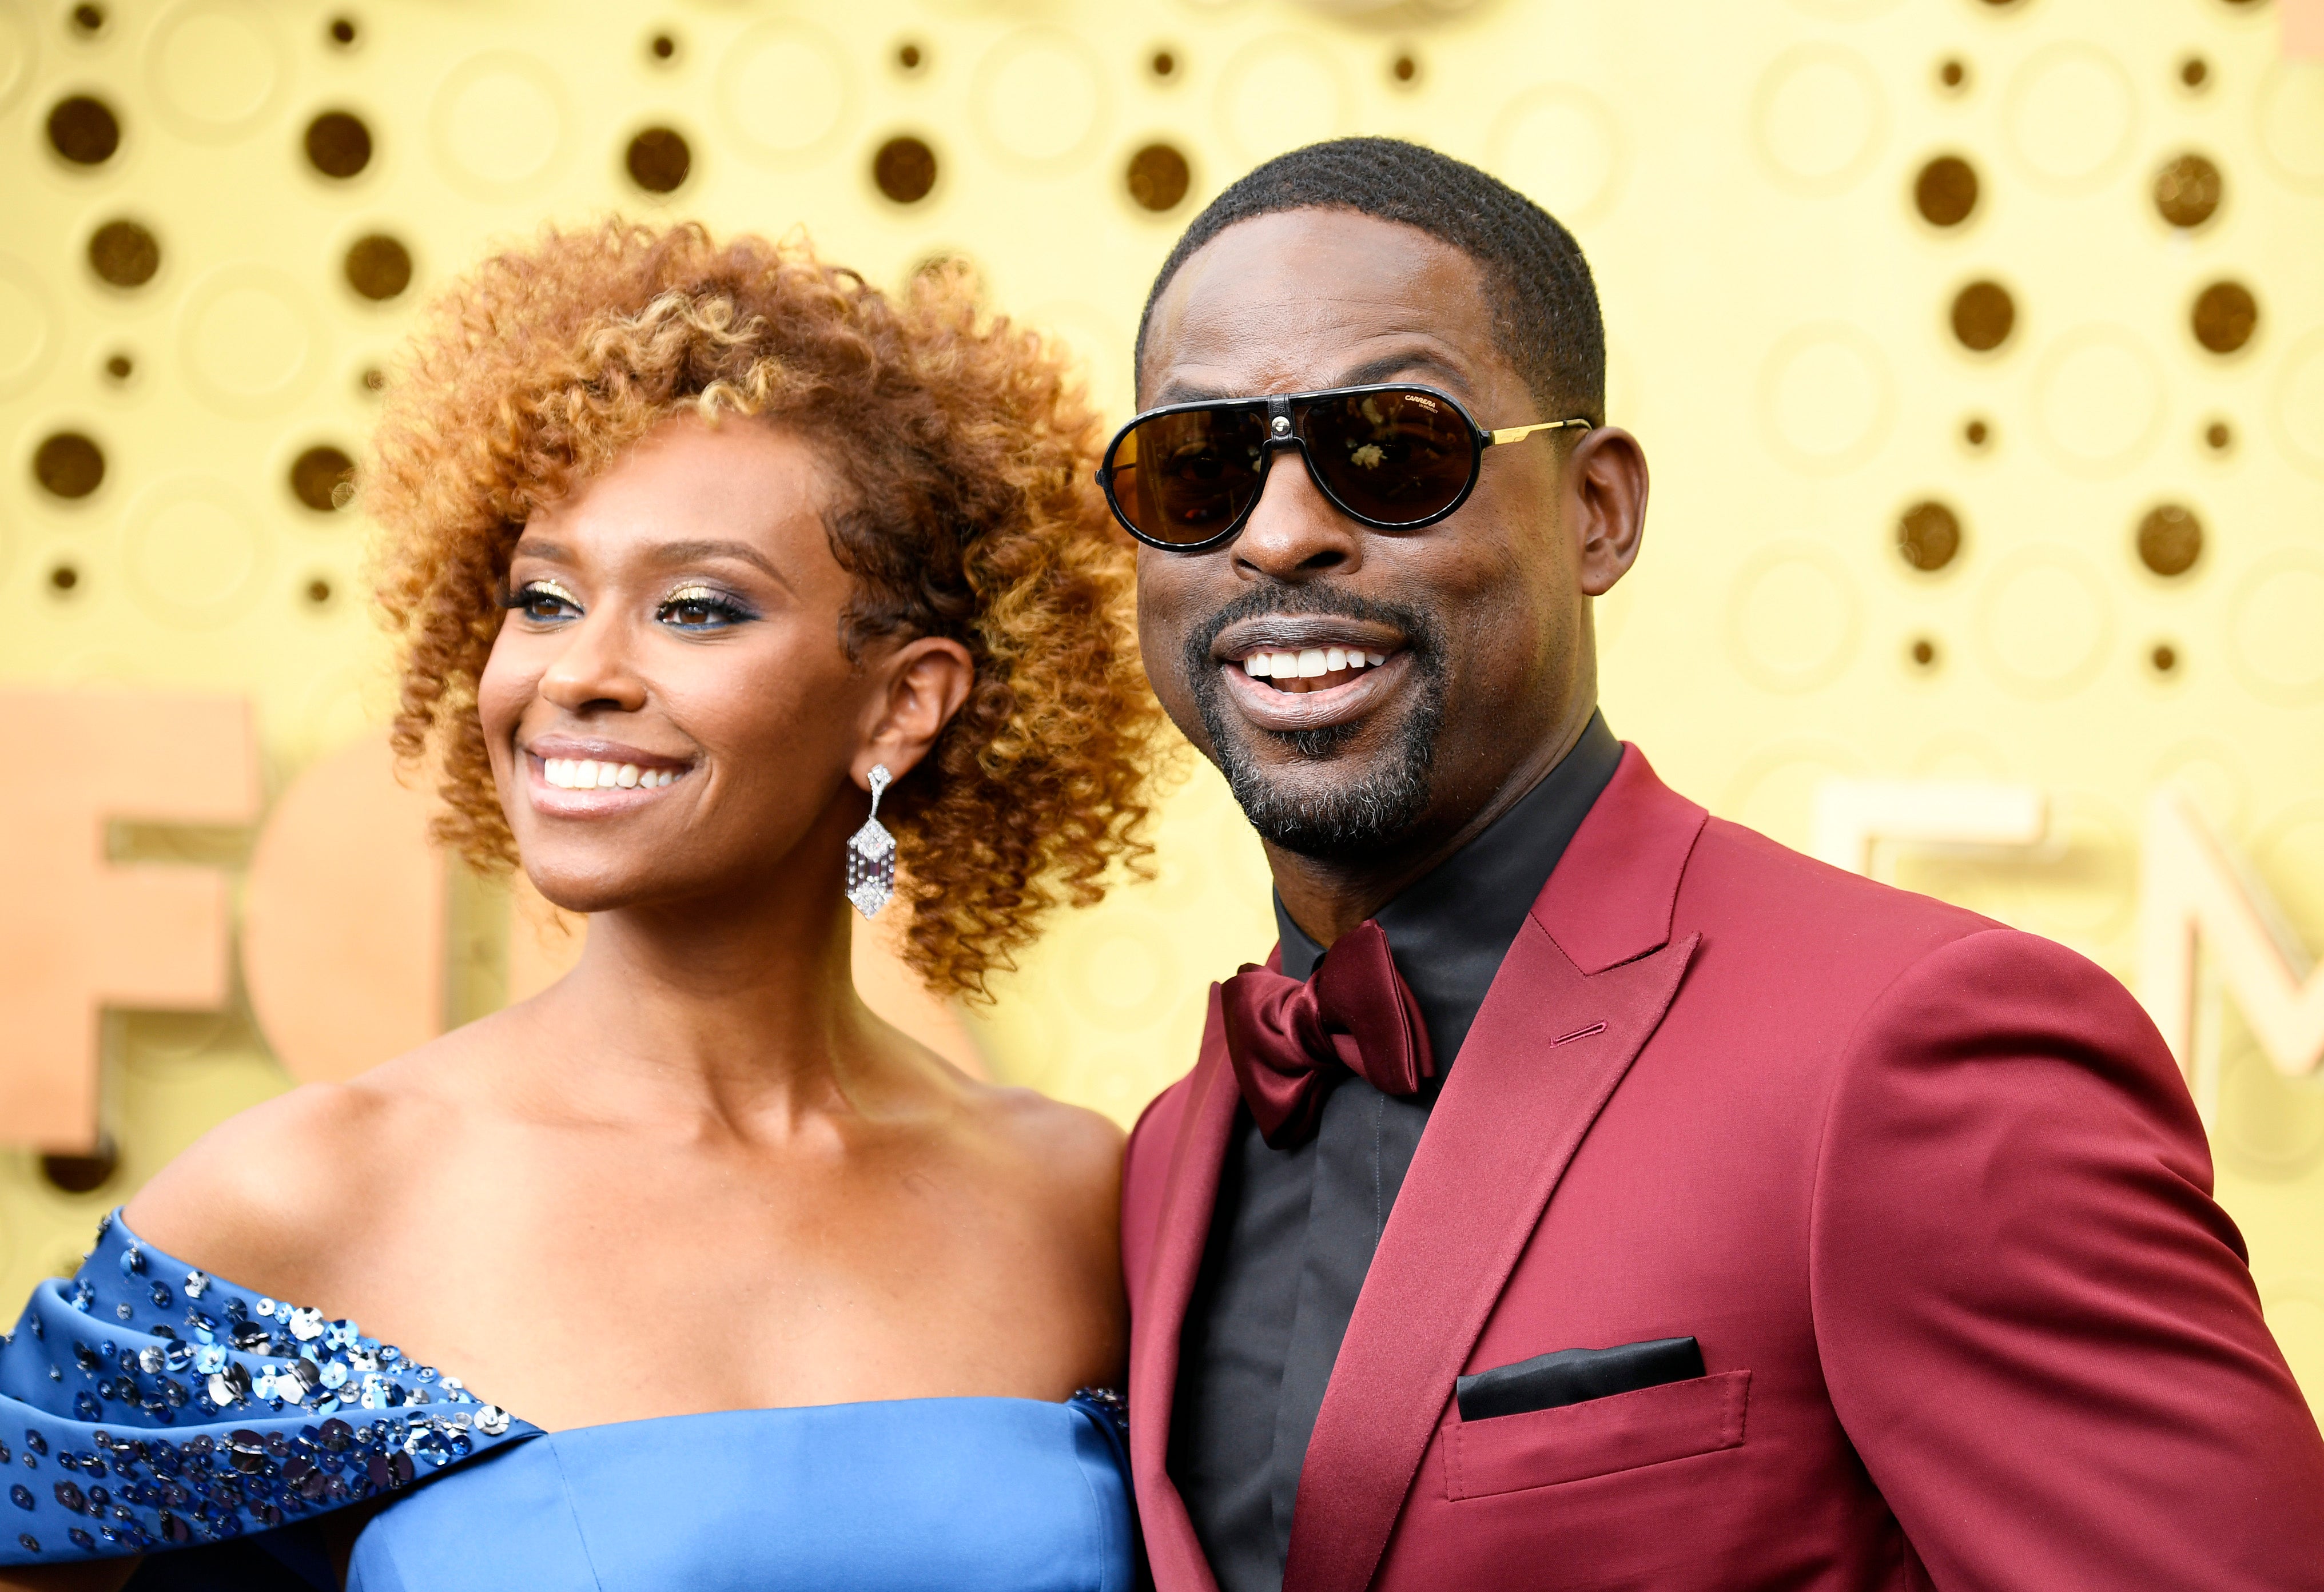 Black Love Shined On The 2019 Emmys Red Carpet